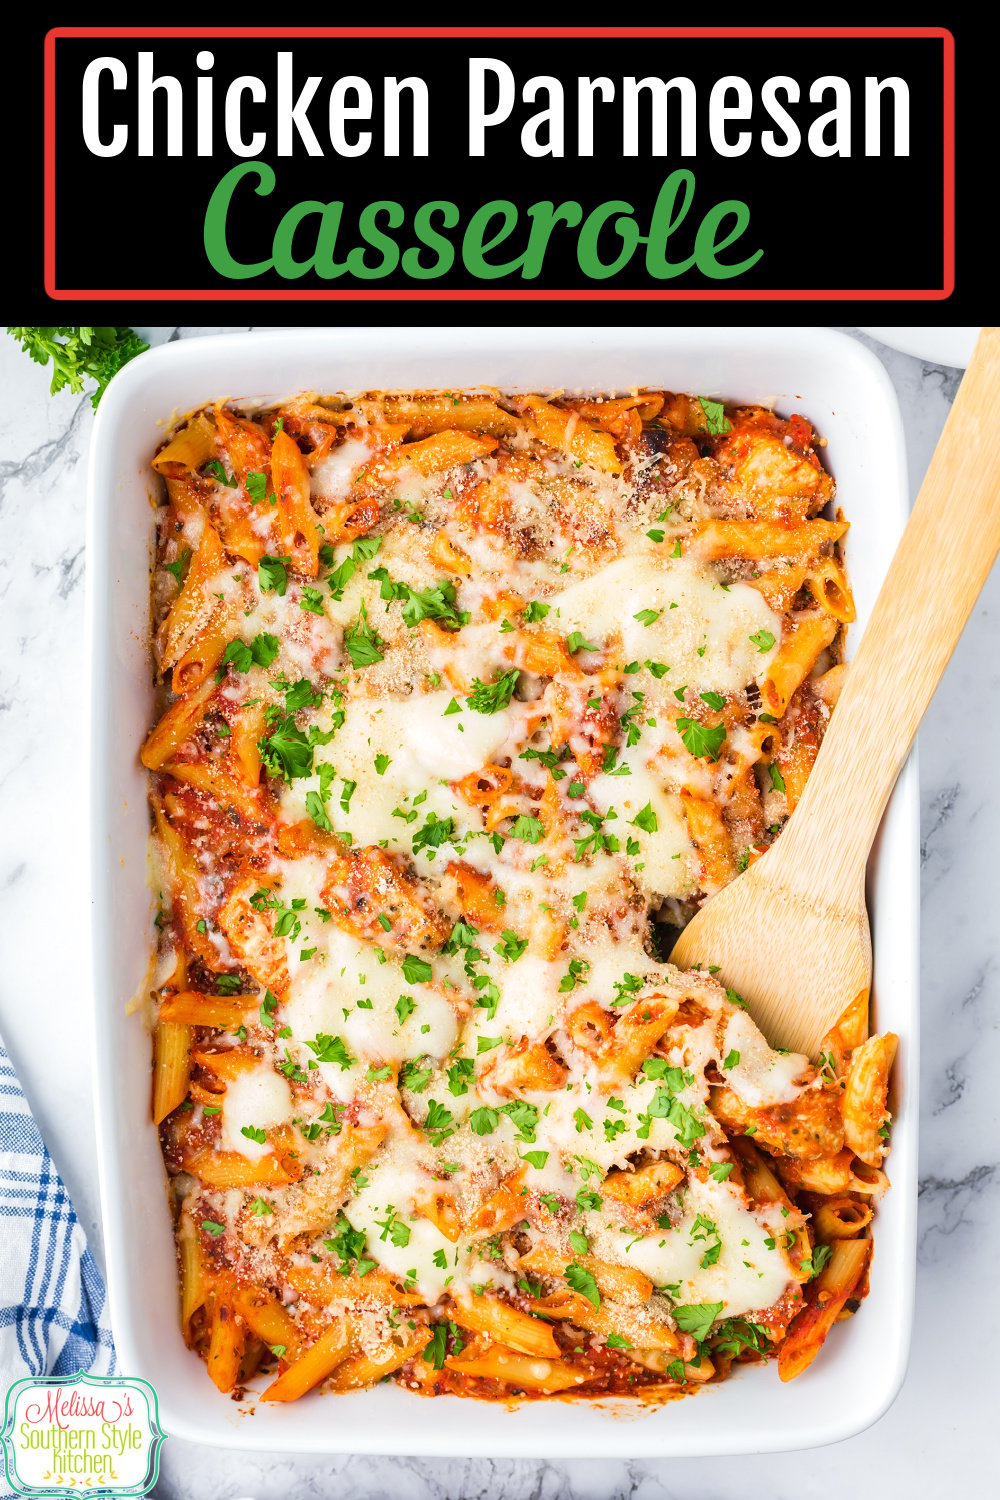 Add this Chicken Parmesan Casserole to your dinner menu and enjoy Italian night at home. #chickenrecipes #chickencasserole #chickenparmesan #parmesanchicken #casseroles #easychickenrecipes #pasta via @melissasssk